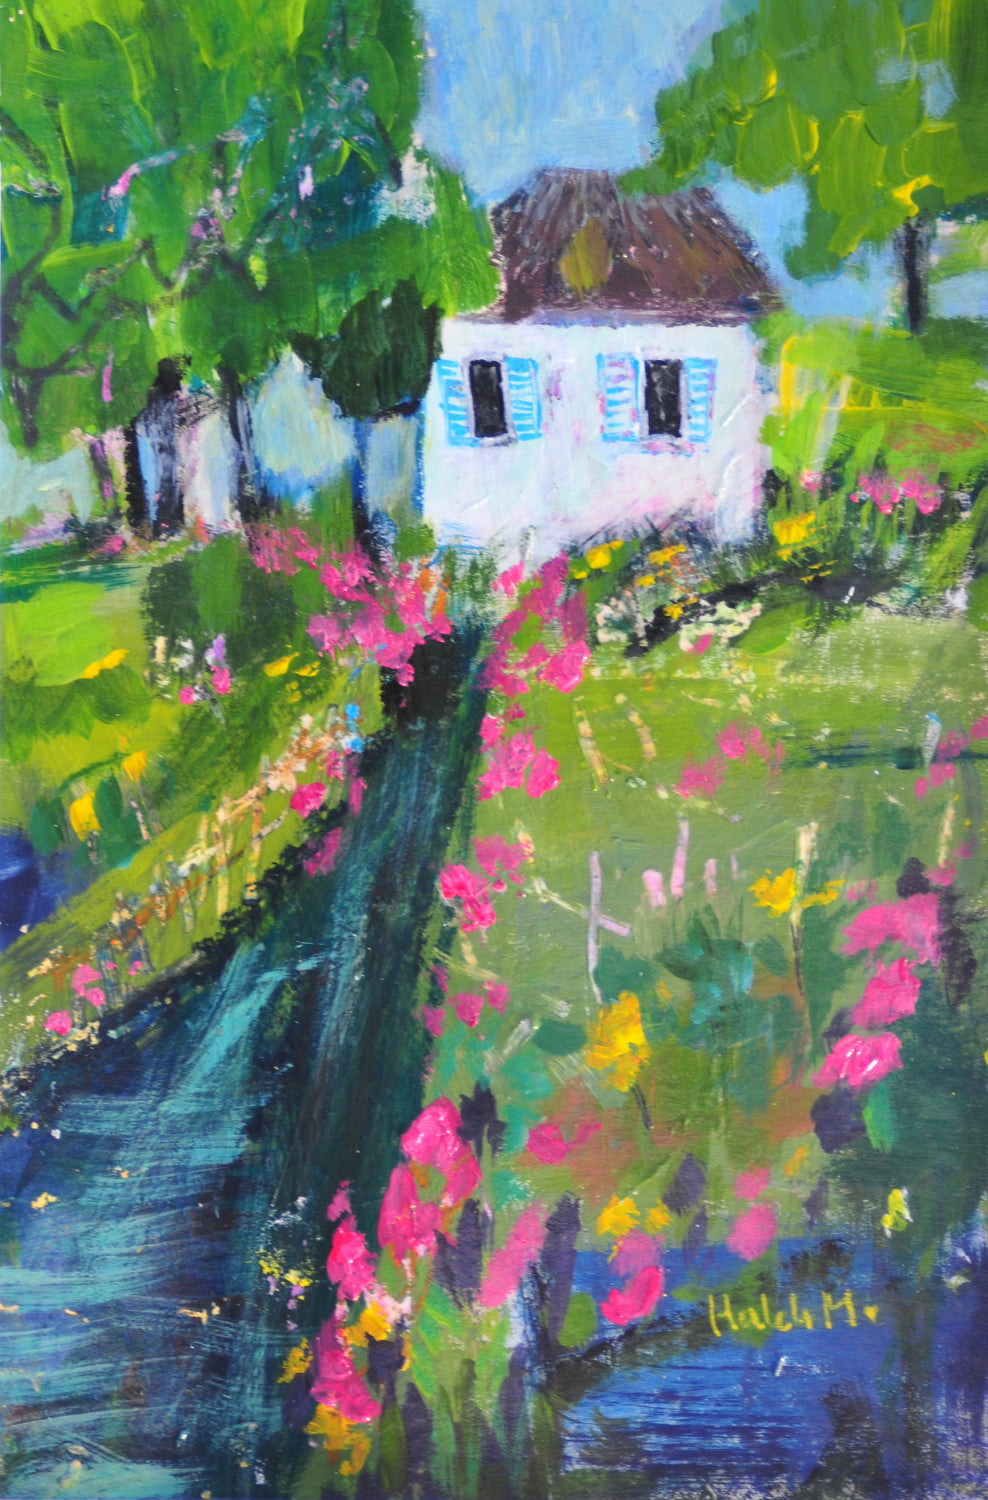 A house painting by a river filled with flowers